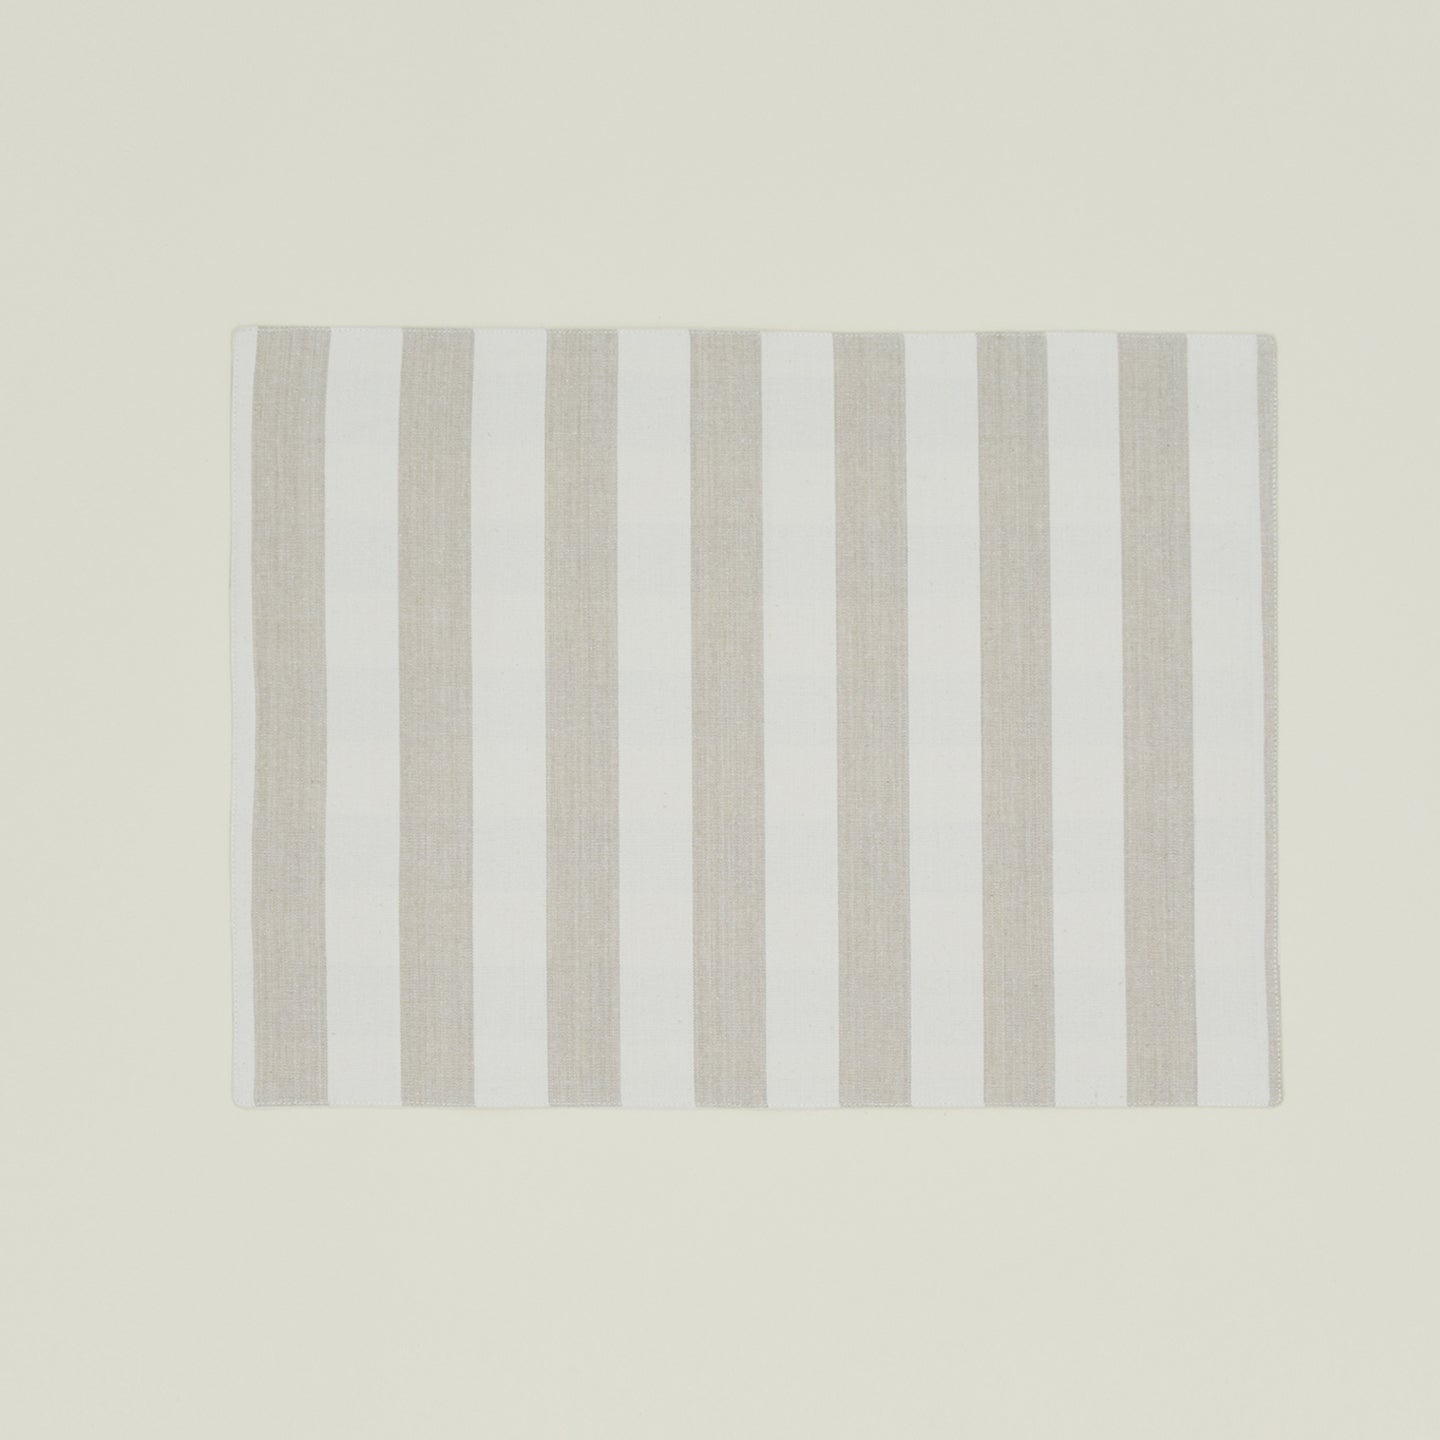 Essential Striped Placemat, Set of 4 - Ivory/Flax